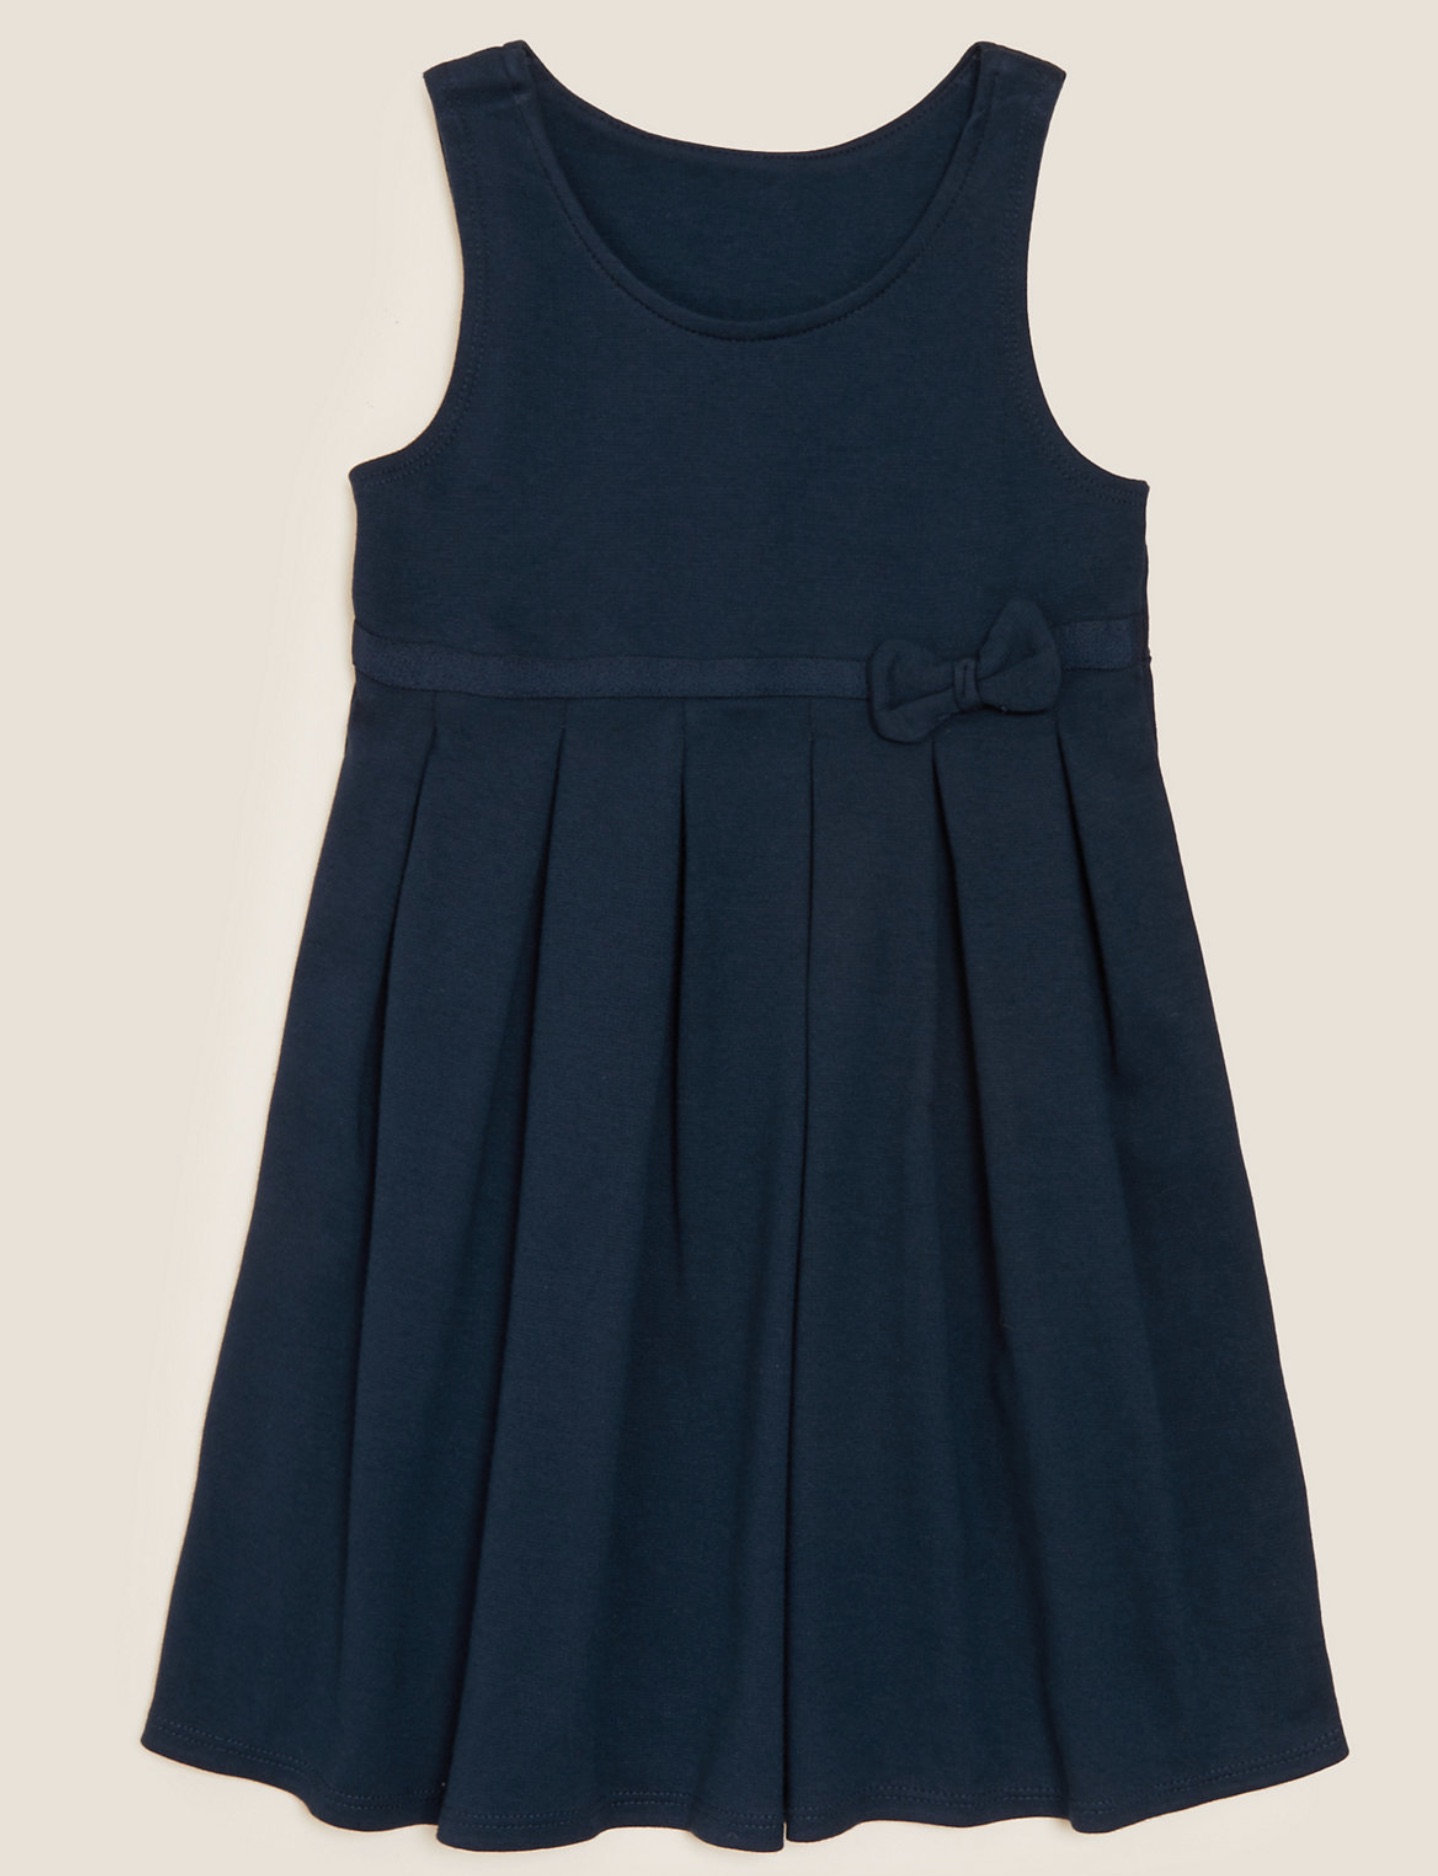 Girls' Navy Jersey Pinafore Dress, Pleated/Gathered Waist 6-7 Y